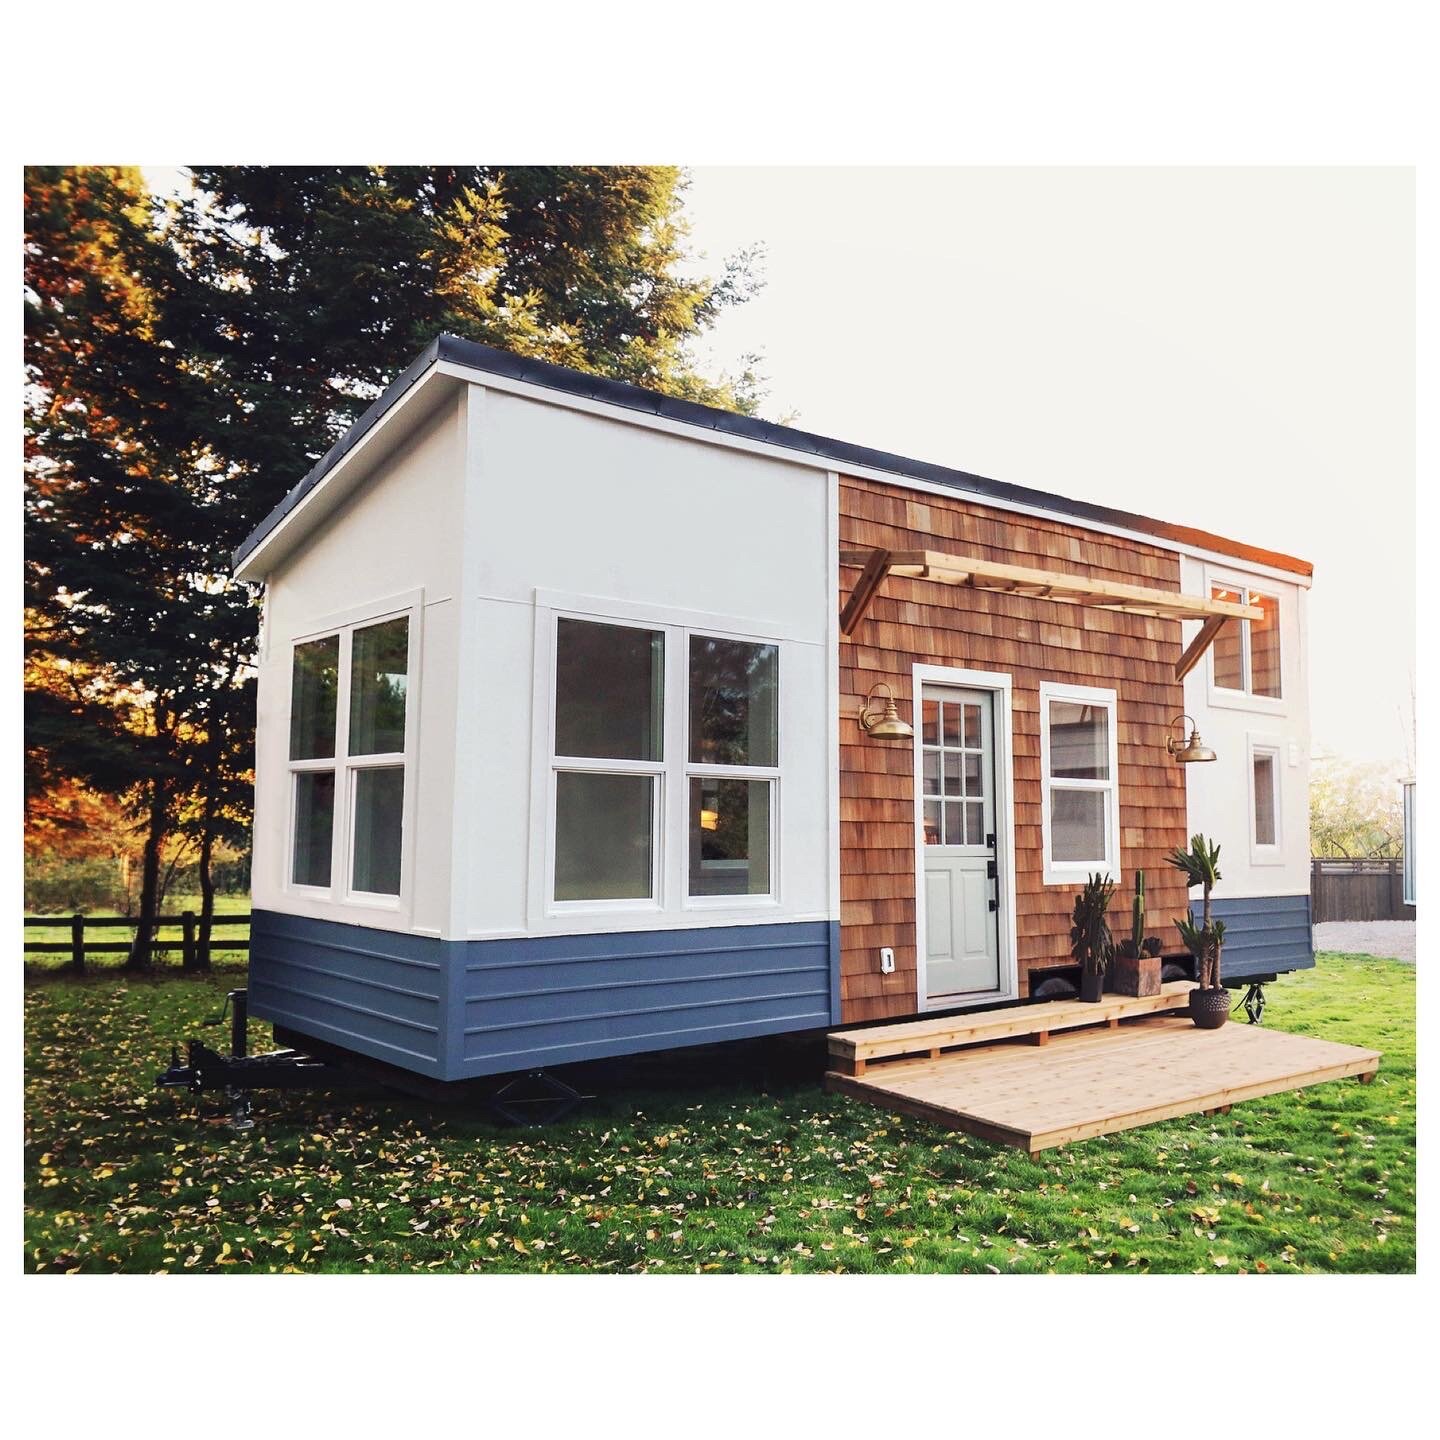 Sanctuary Tiny Home — Handcrafted Movement